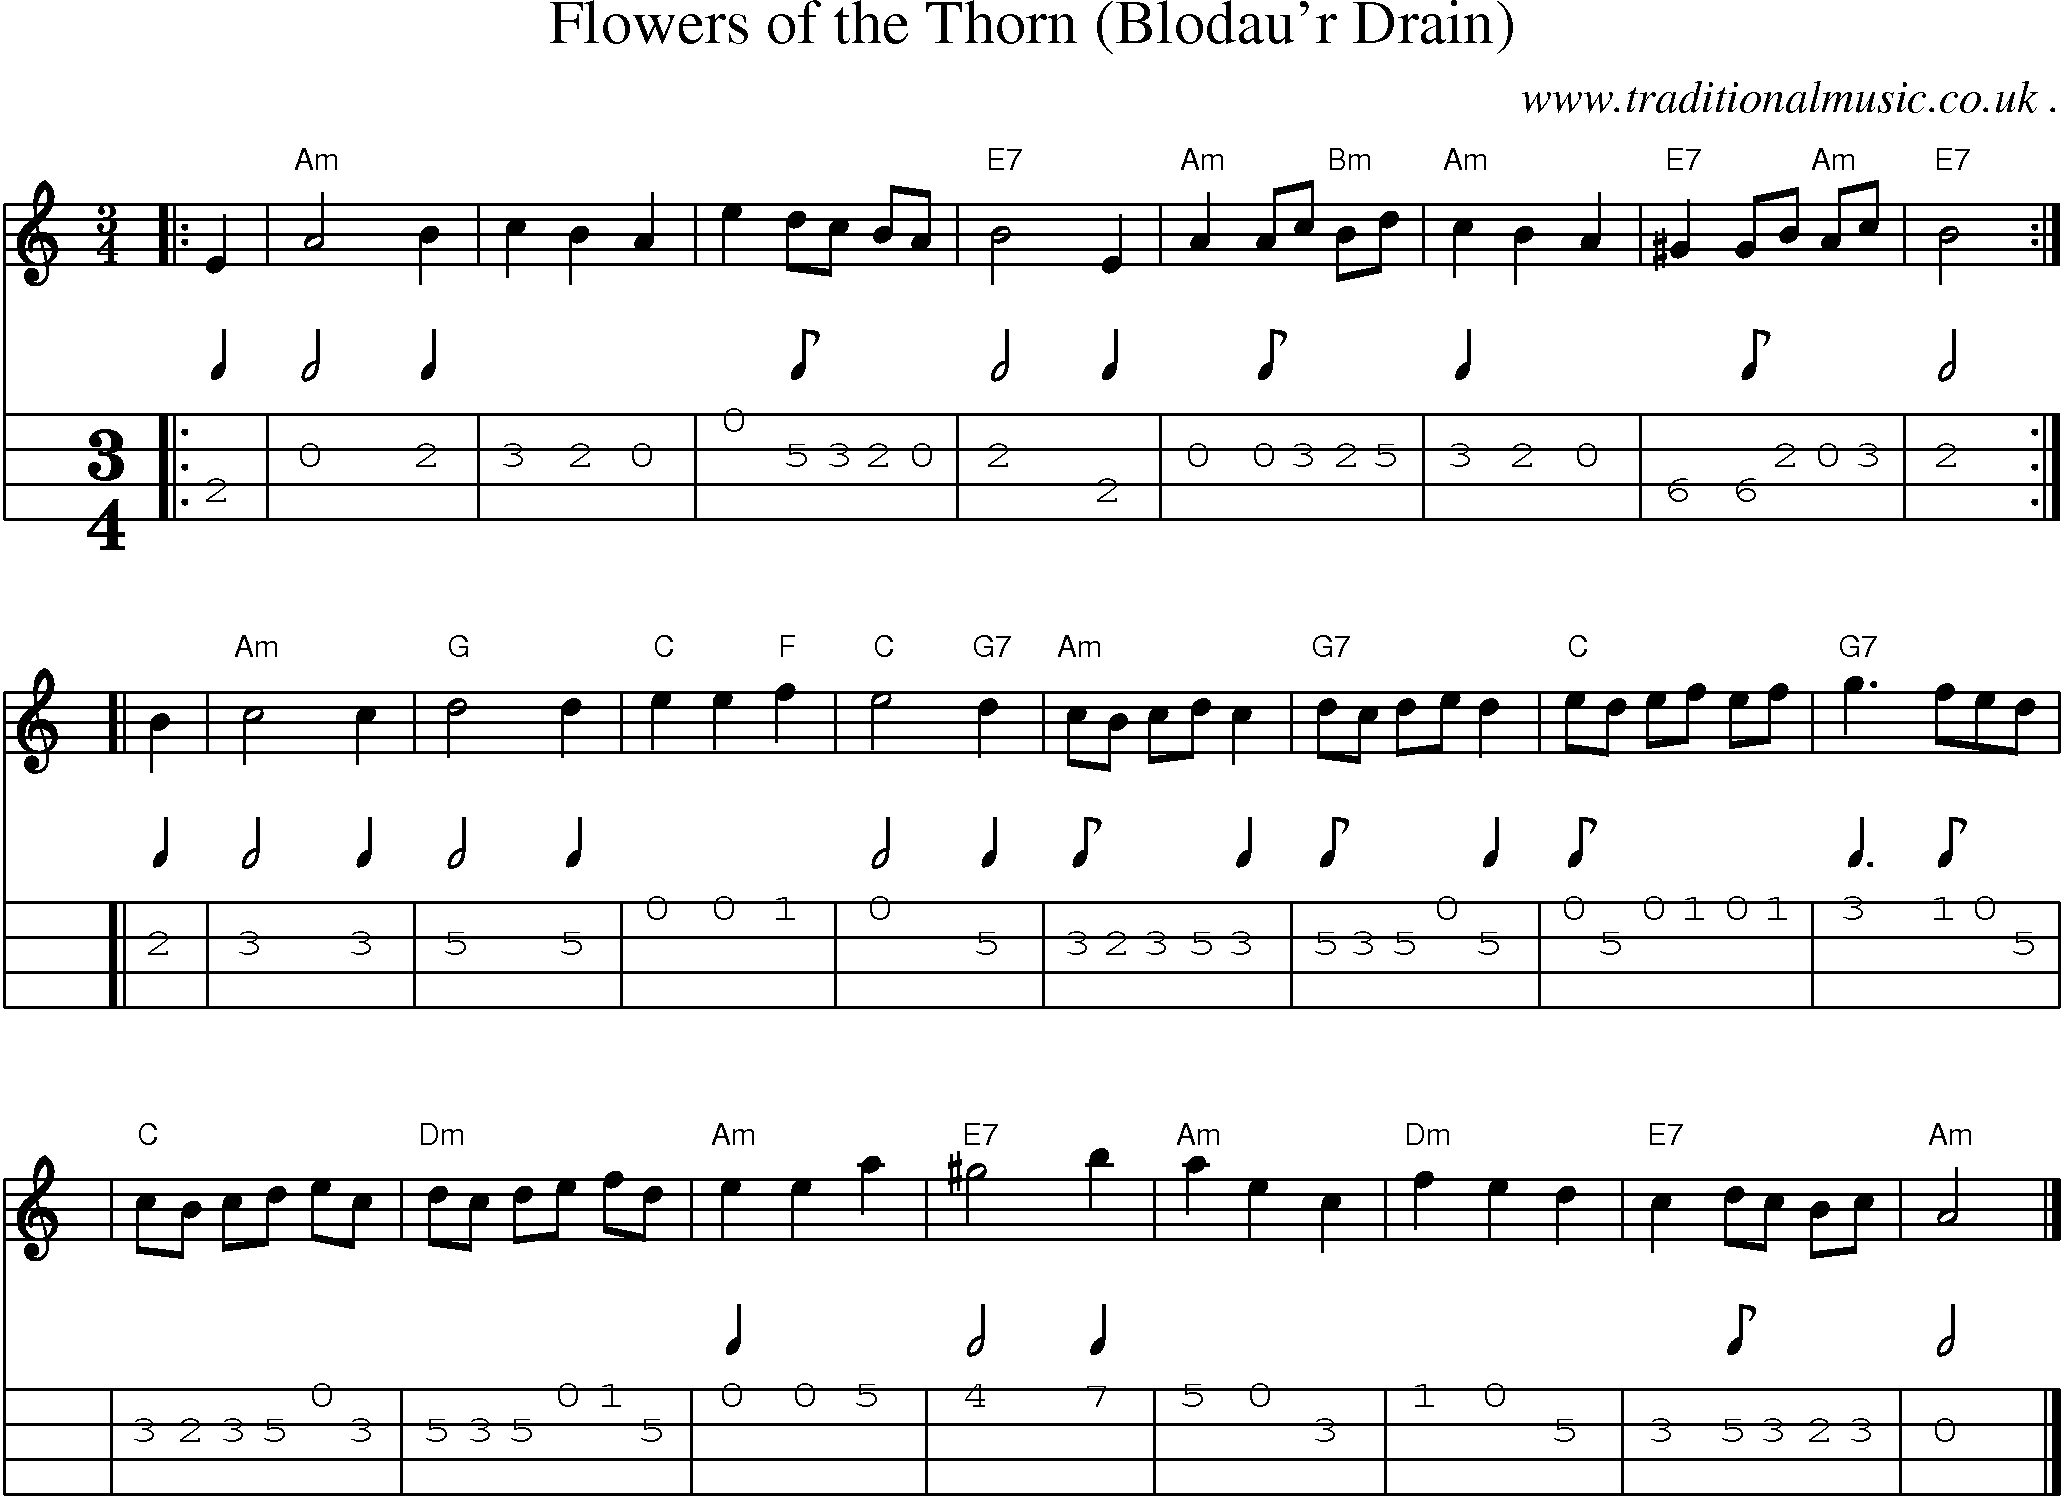 Sheet-music  score, Chords and Mandolin Tabs for Flowers Of The Thorn Blodaur Drain